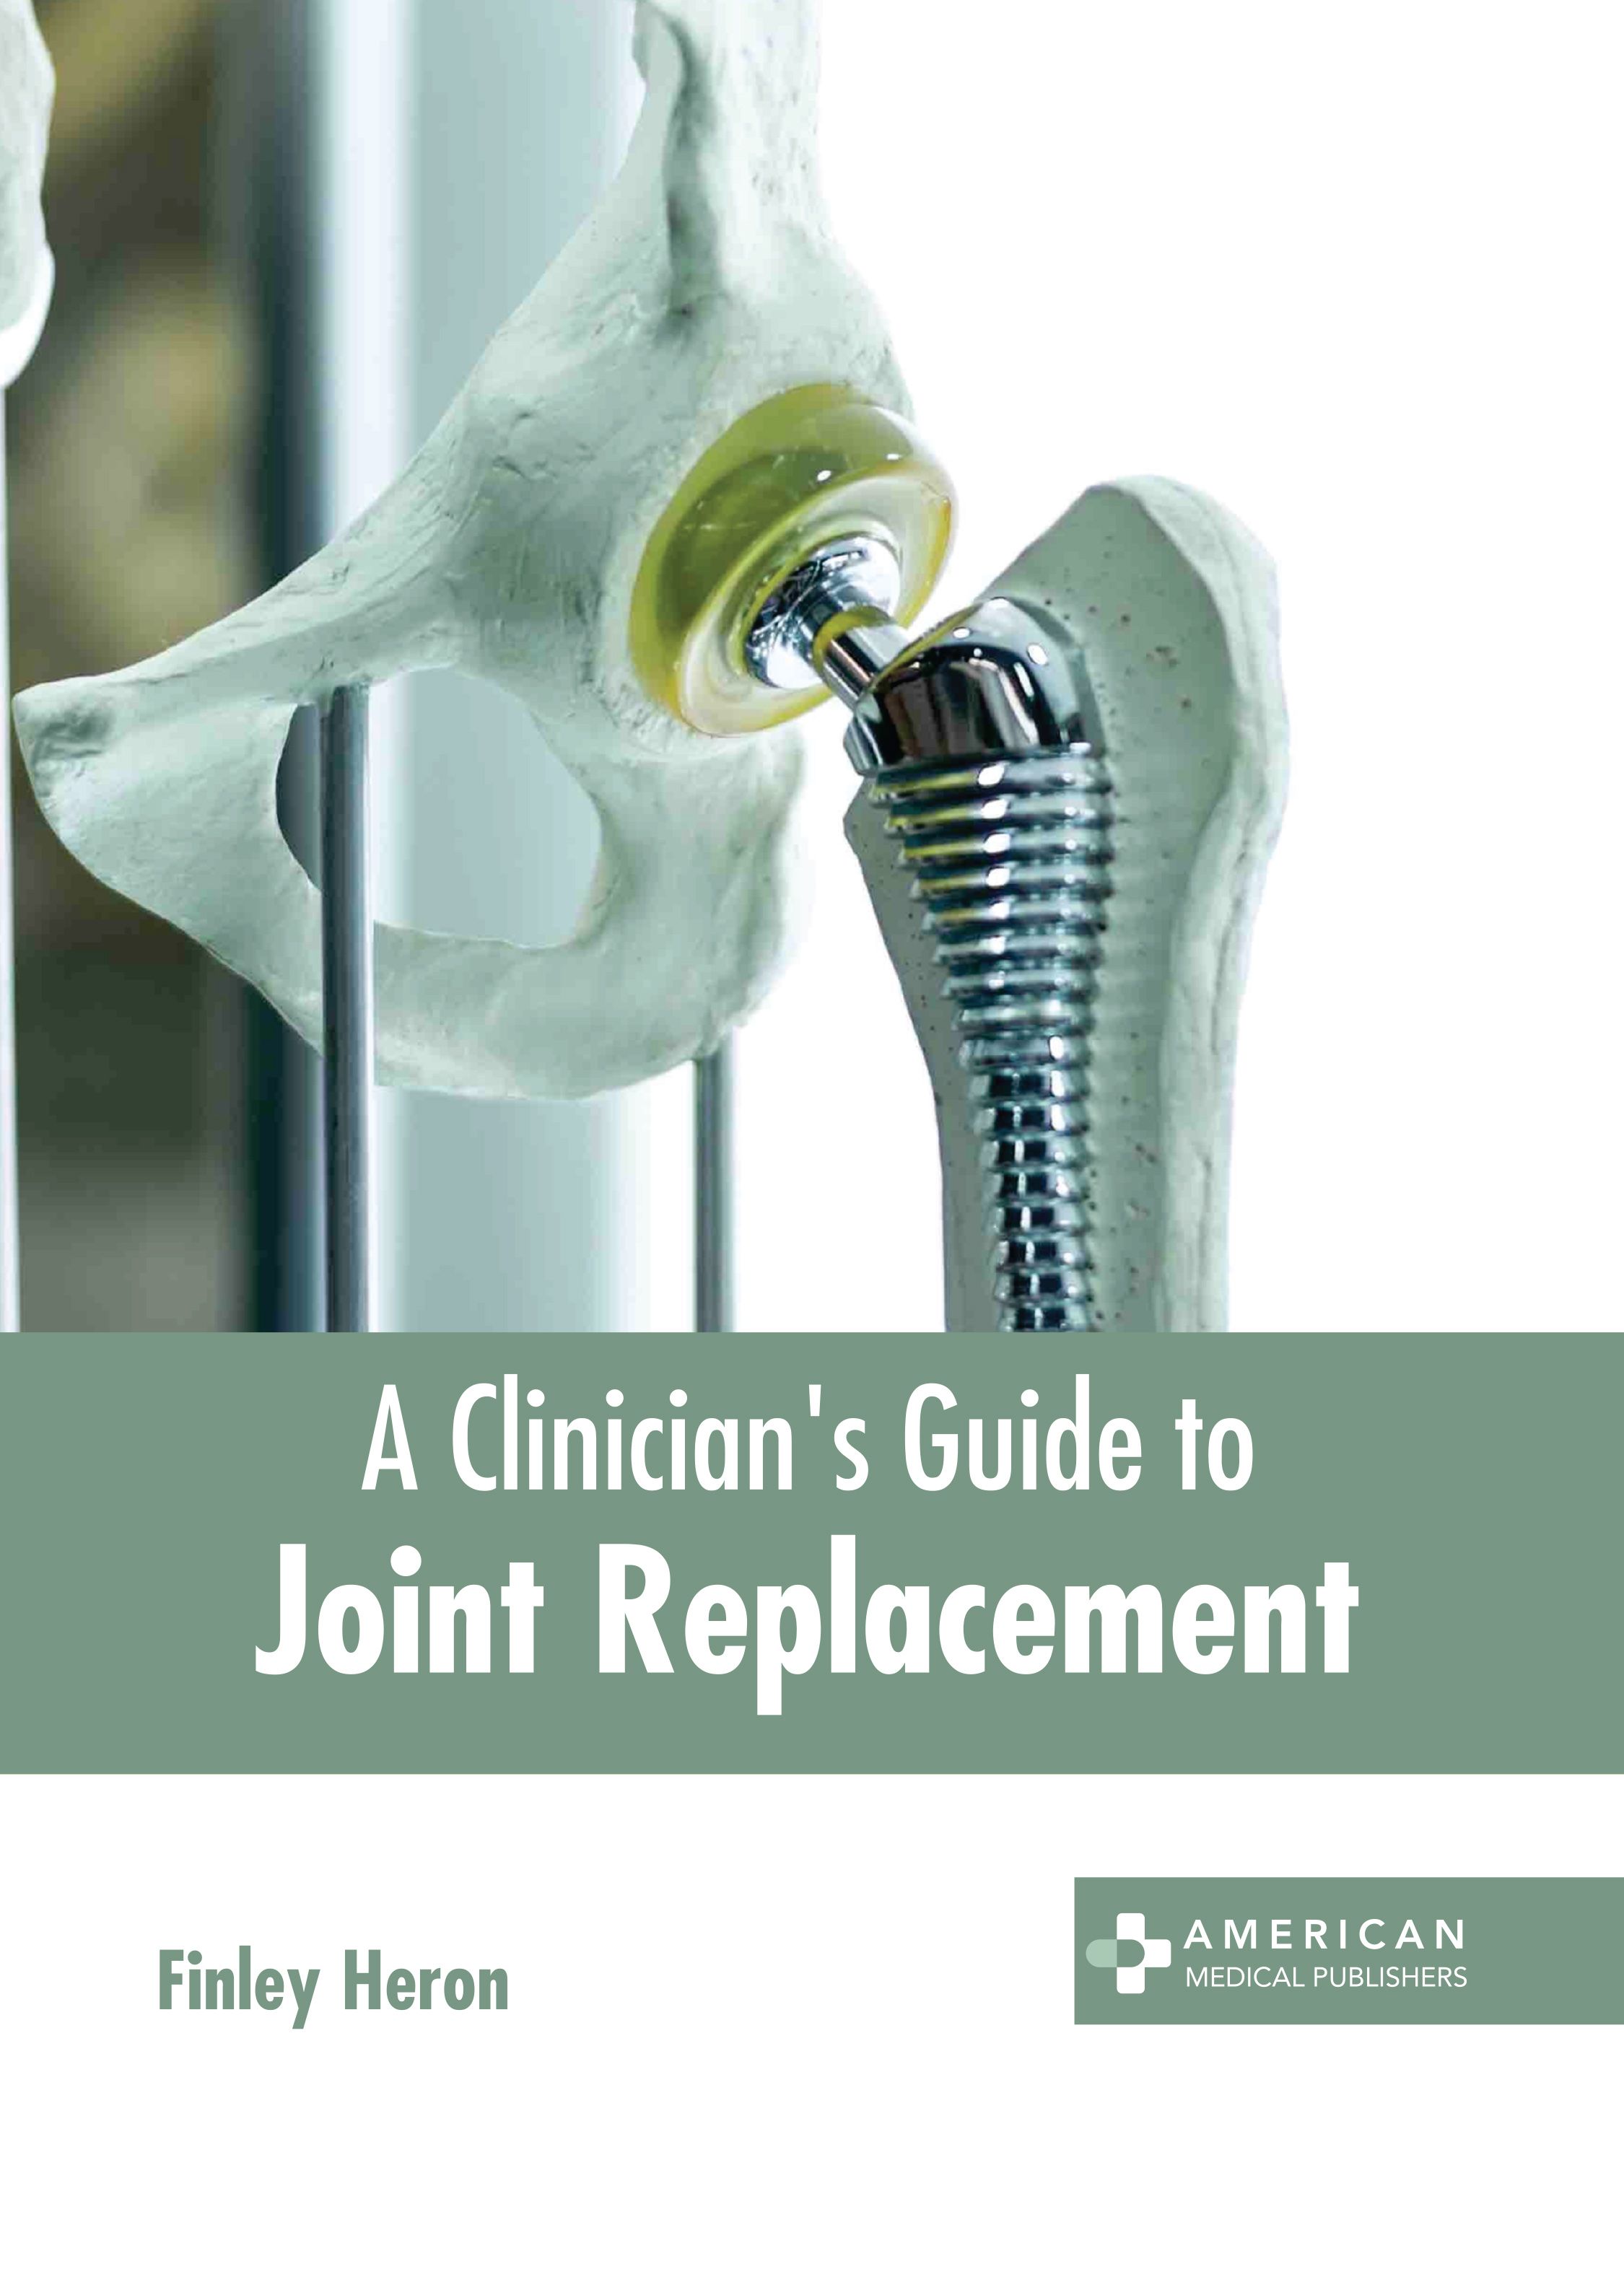 A CLINICIAN'S GUIDE TO JOINT REPLACEMENT